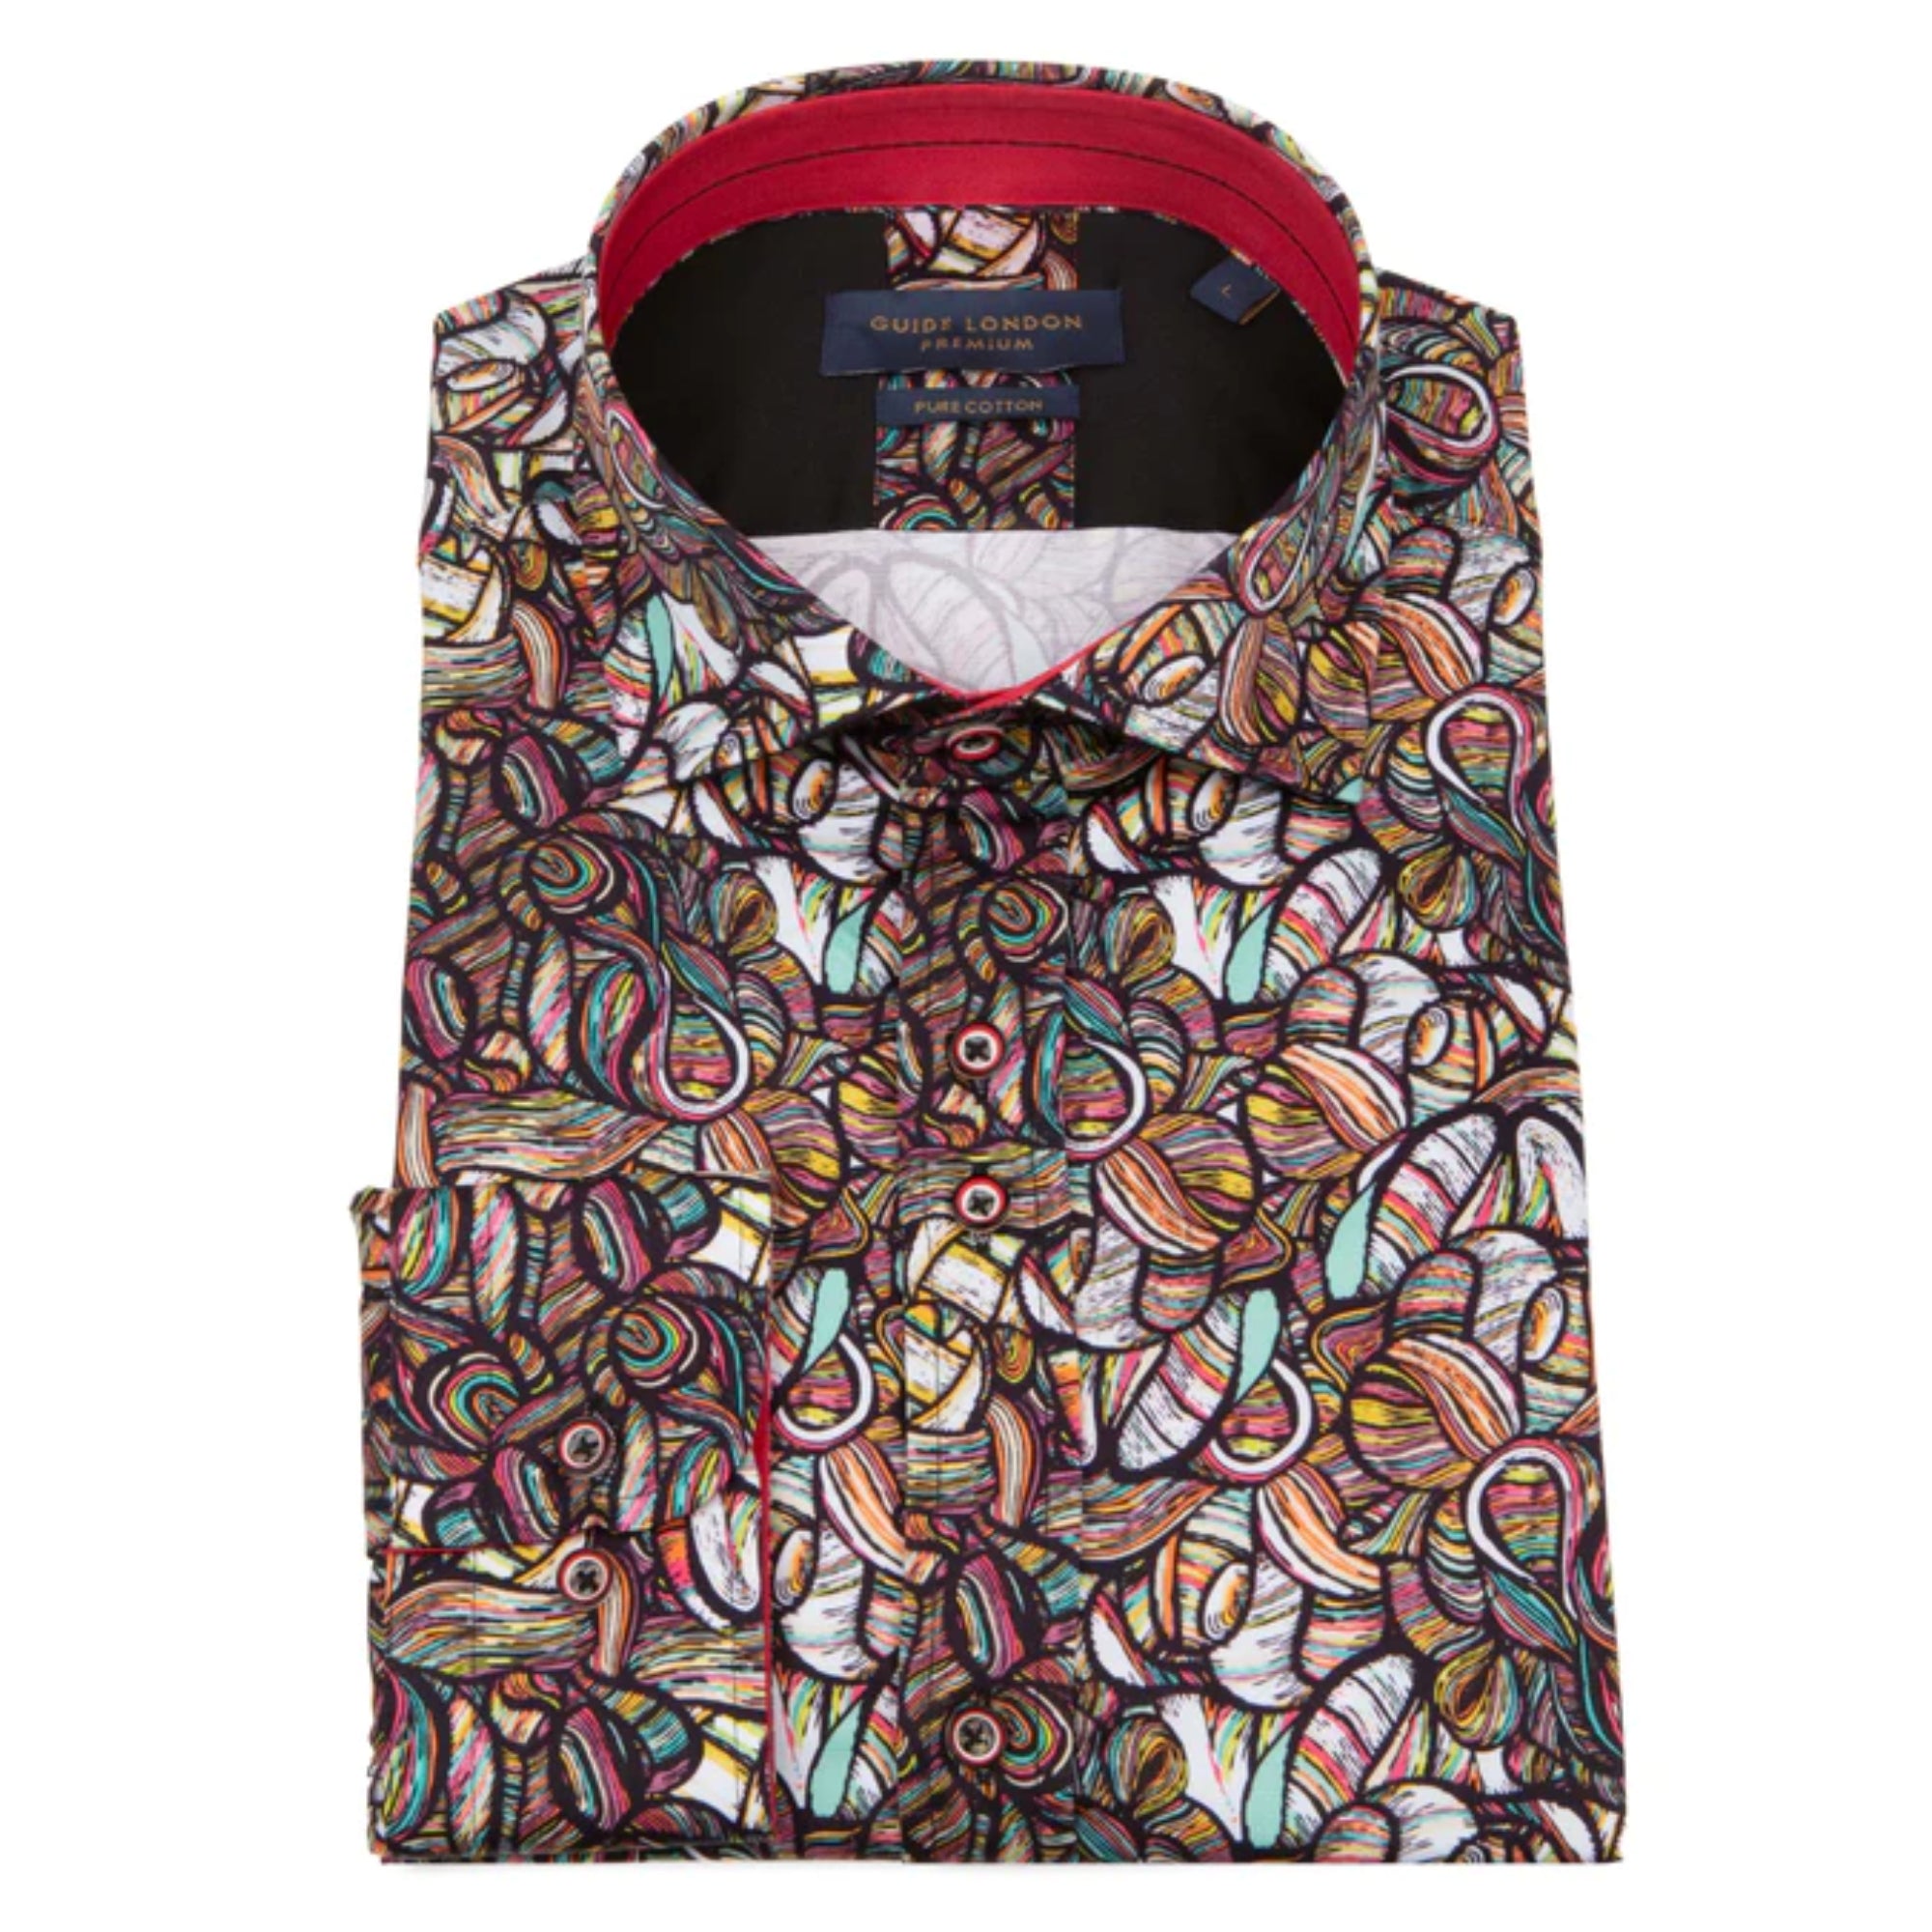 Guide London Abstract Stain Glass Print Shirt - Pink / Multi